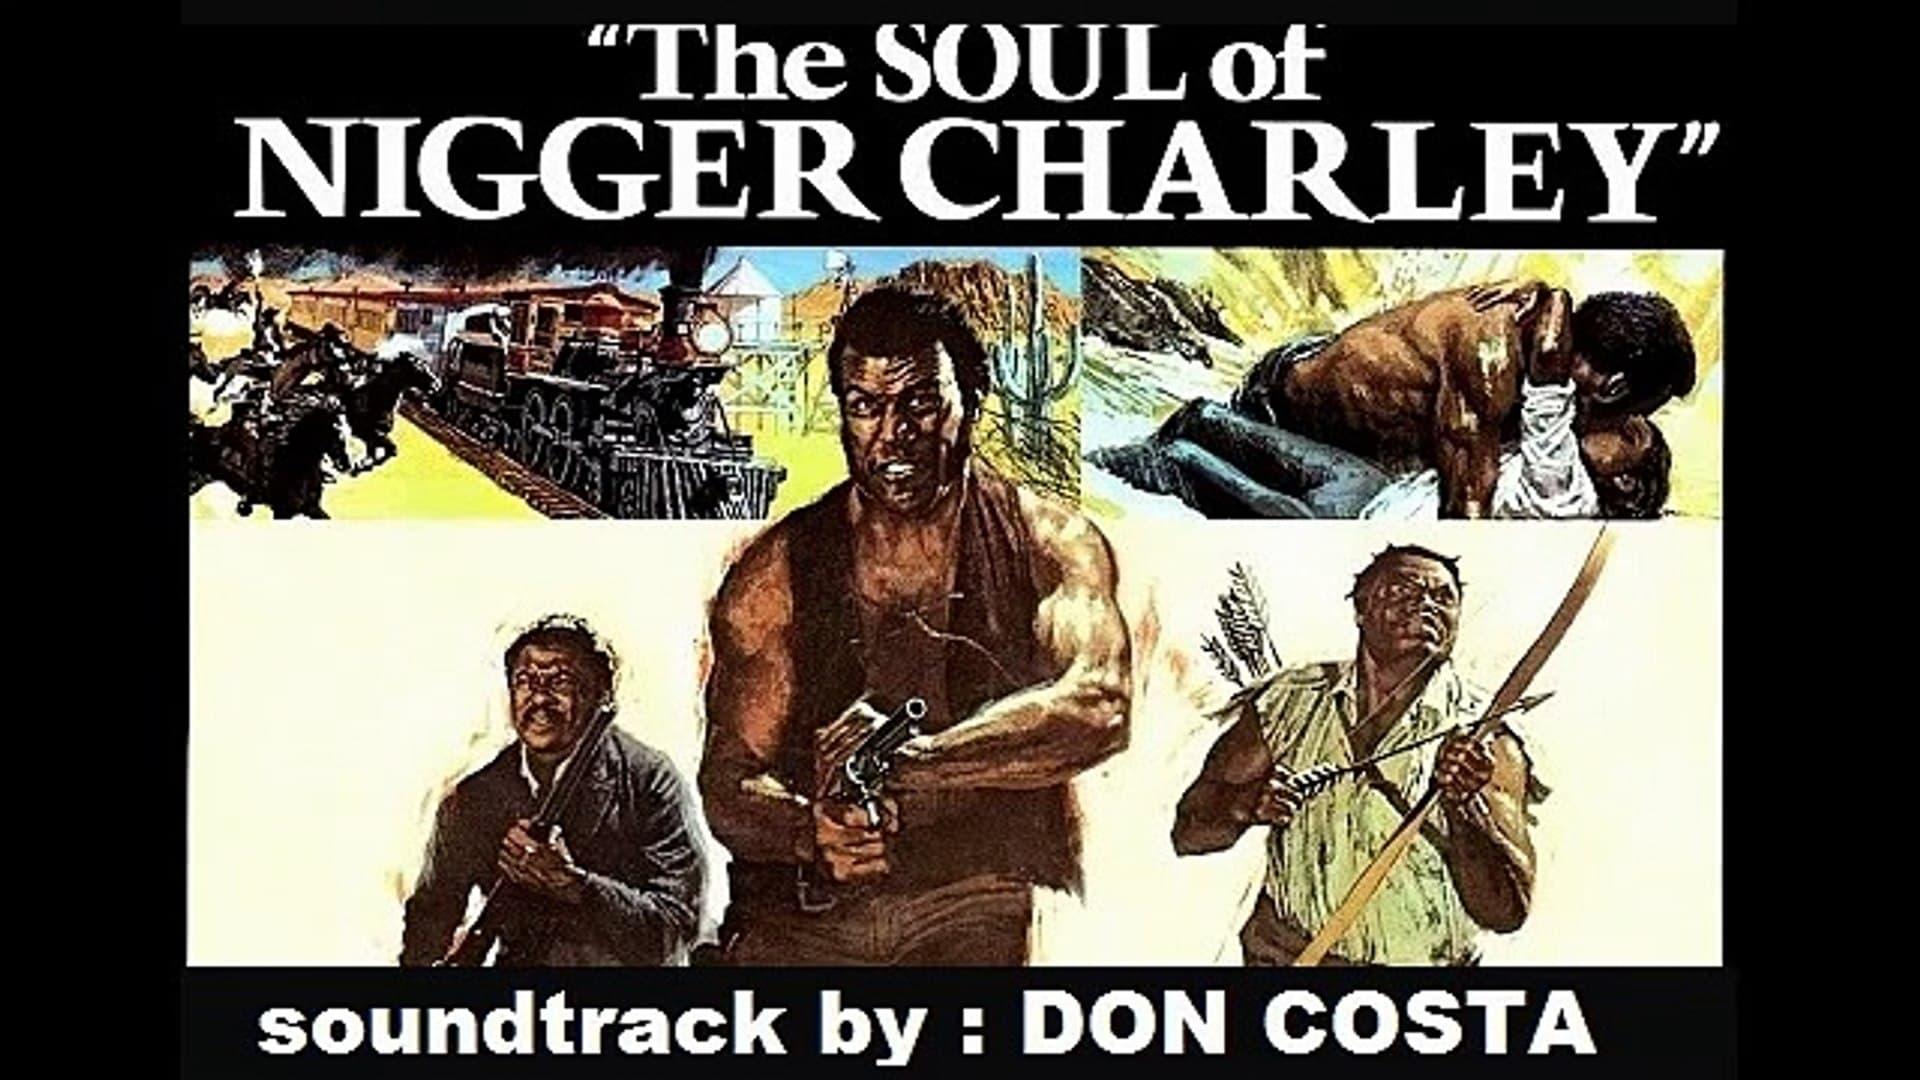 The Soul of Nigger Charley backdrop